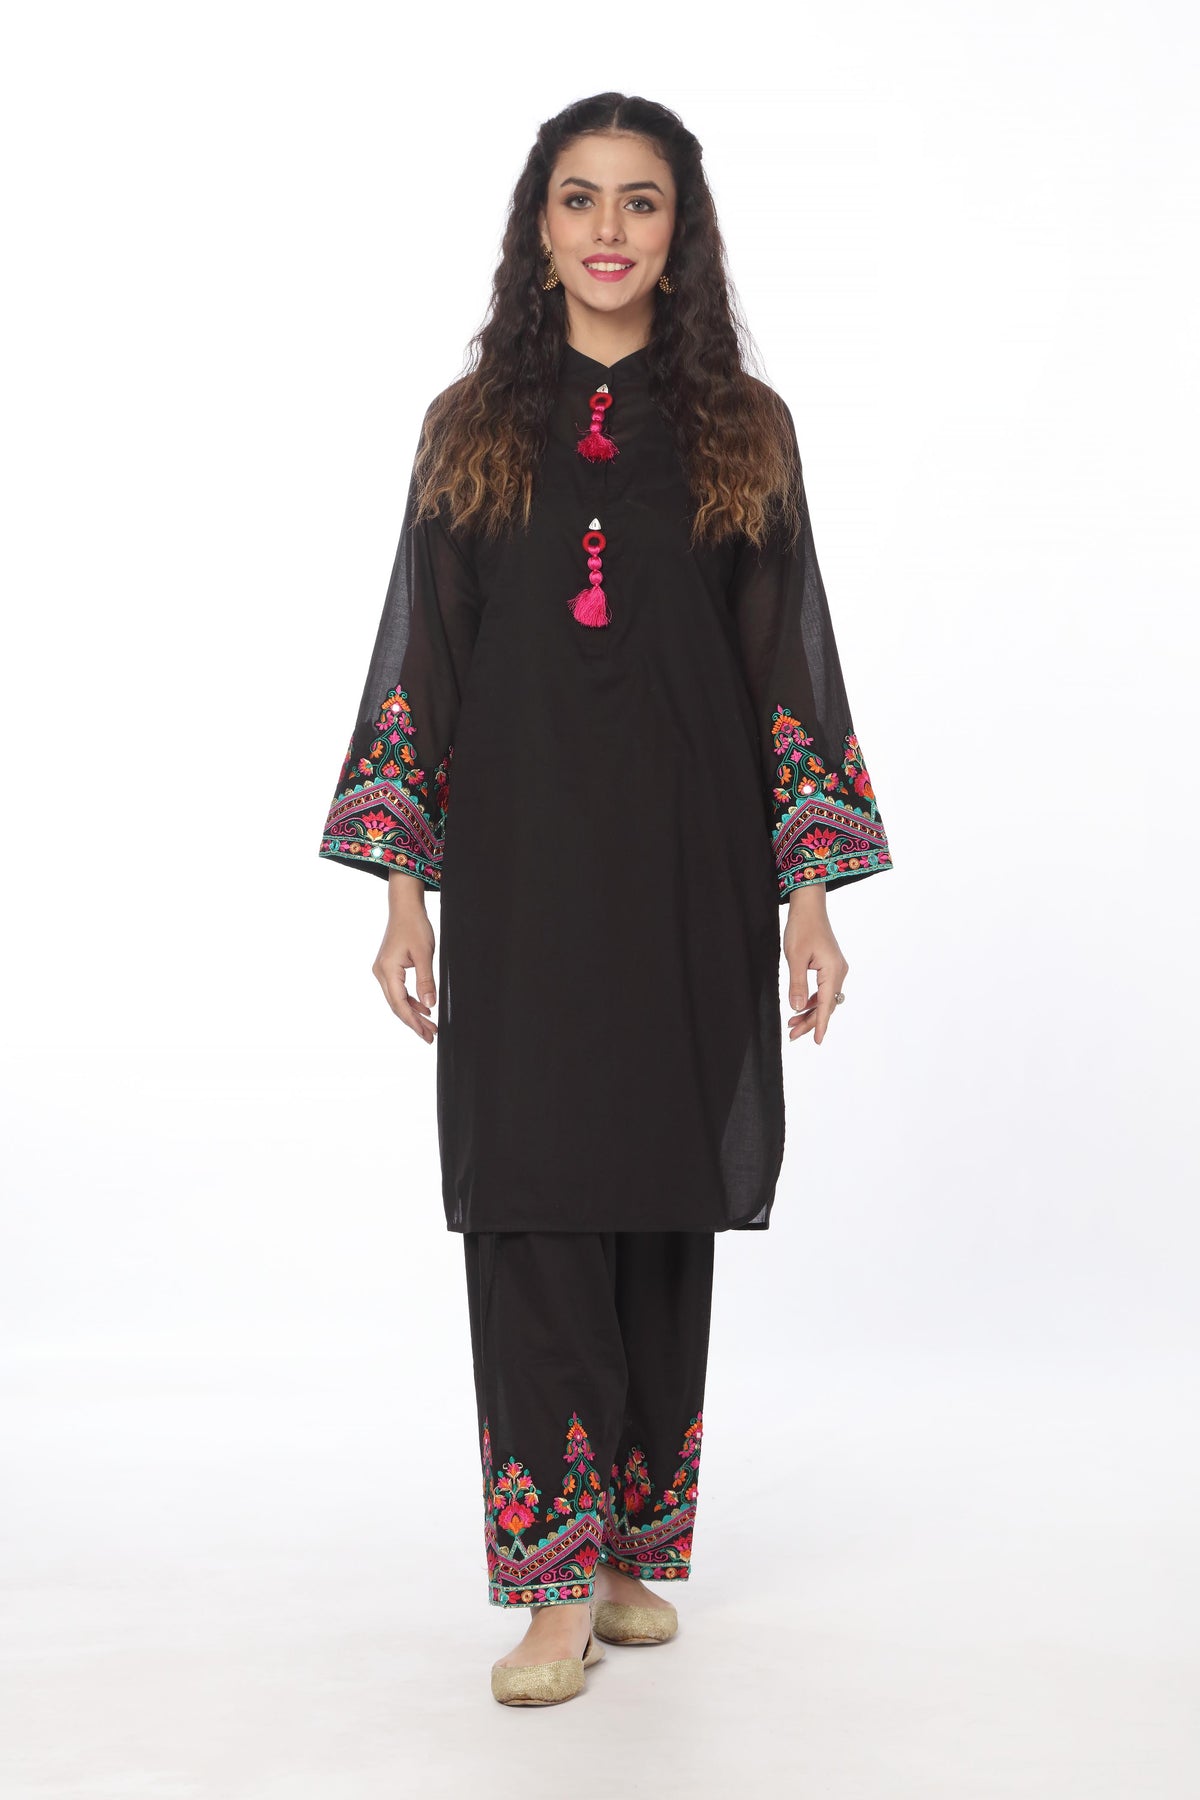 Discover Timeless Style: Black Motif Shirt in Black Printed Lawn ...